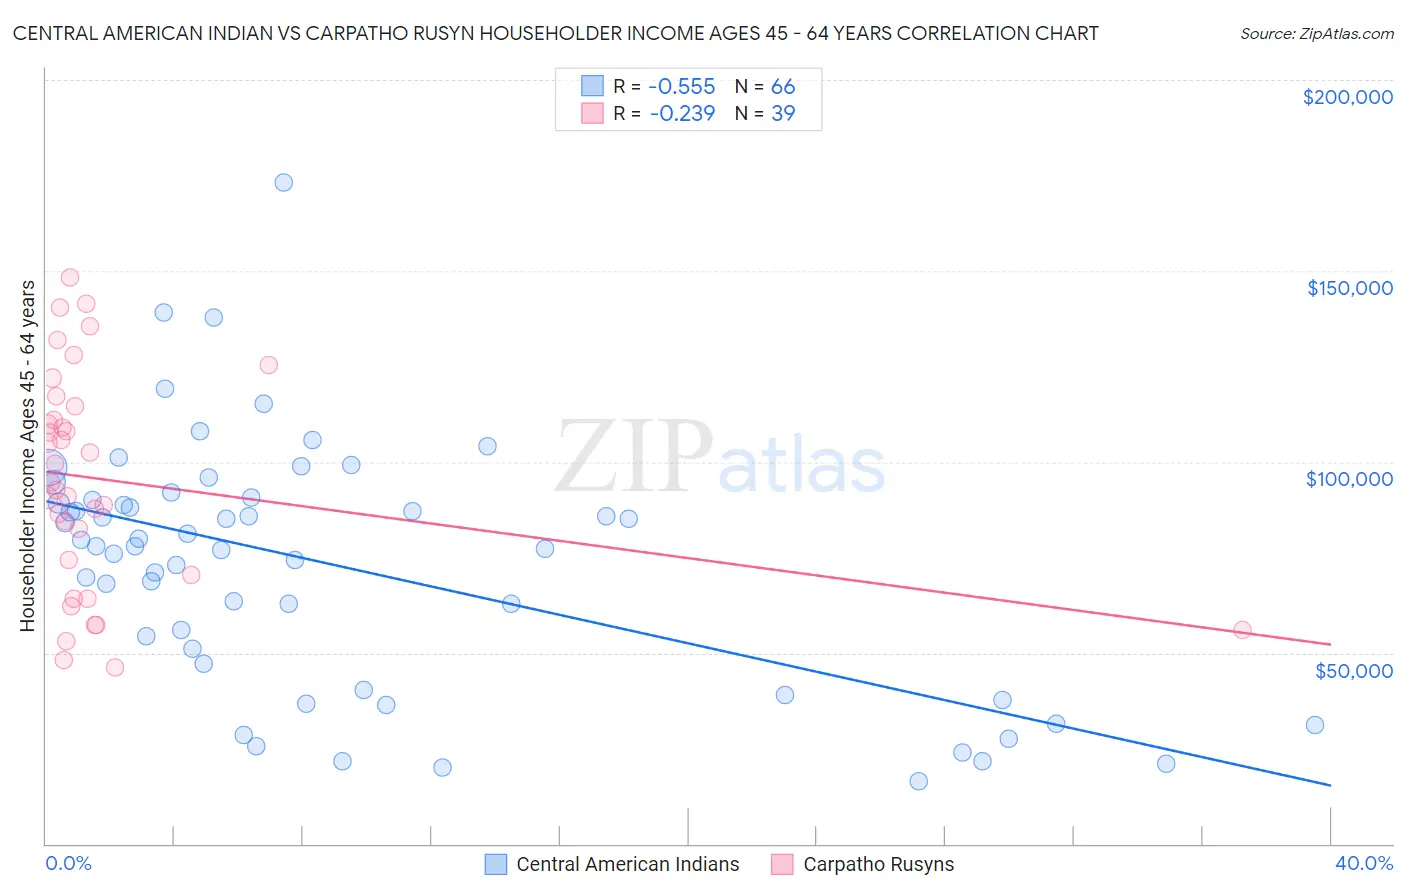 Central American Indian vs Carpatho Rusyn Householder Income Ages 45 - 64 years